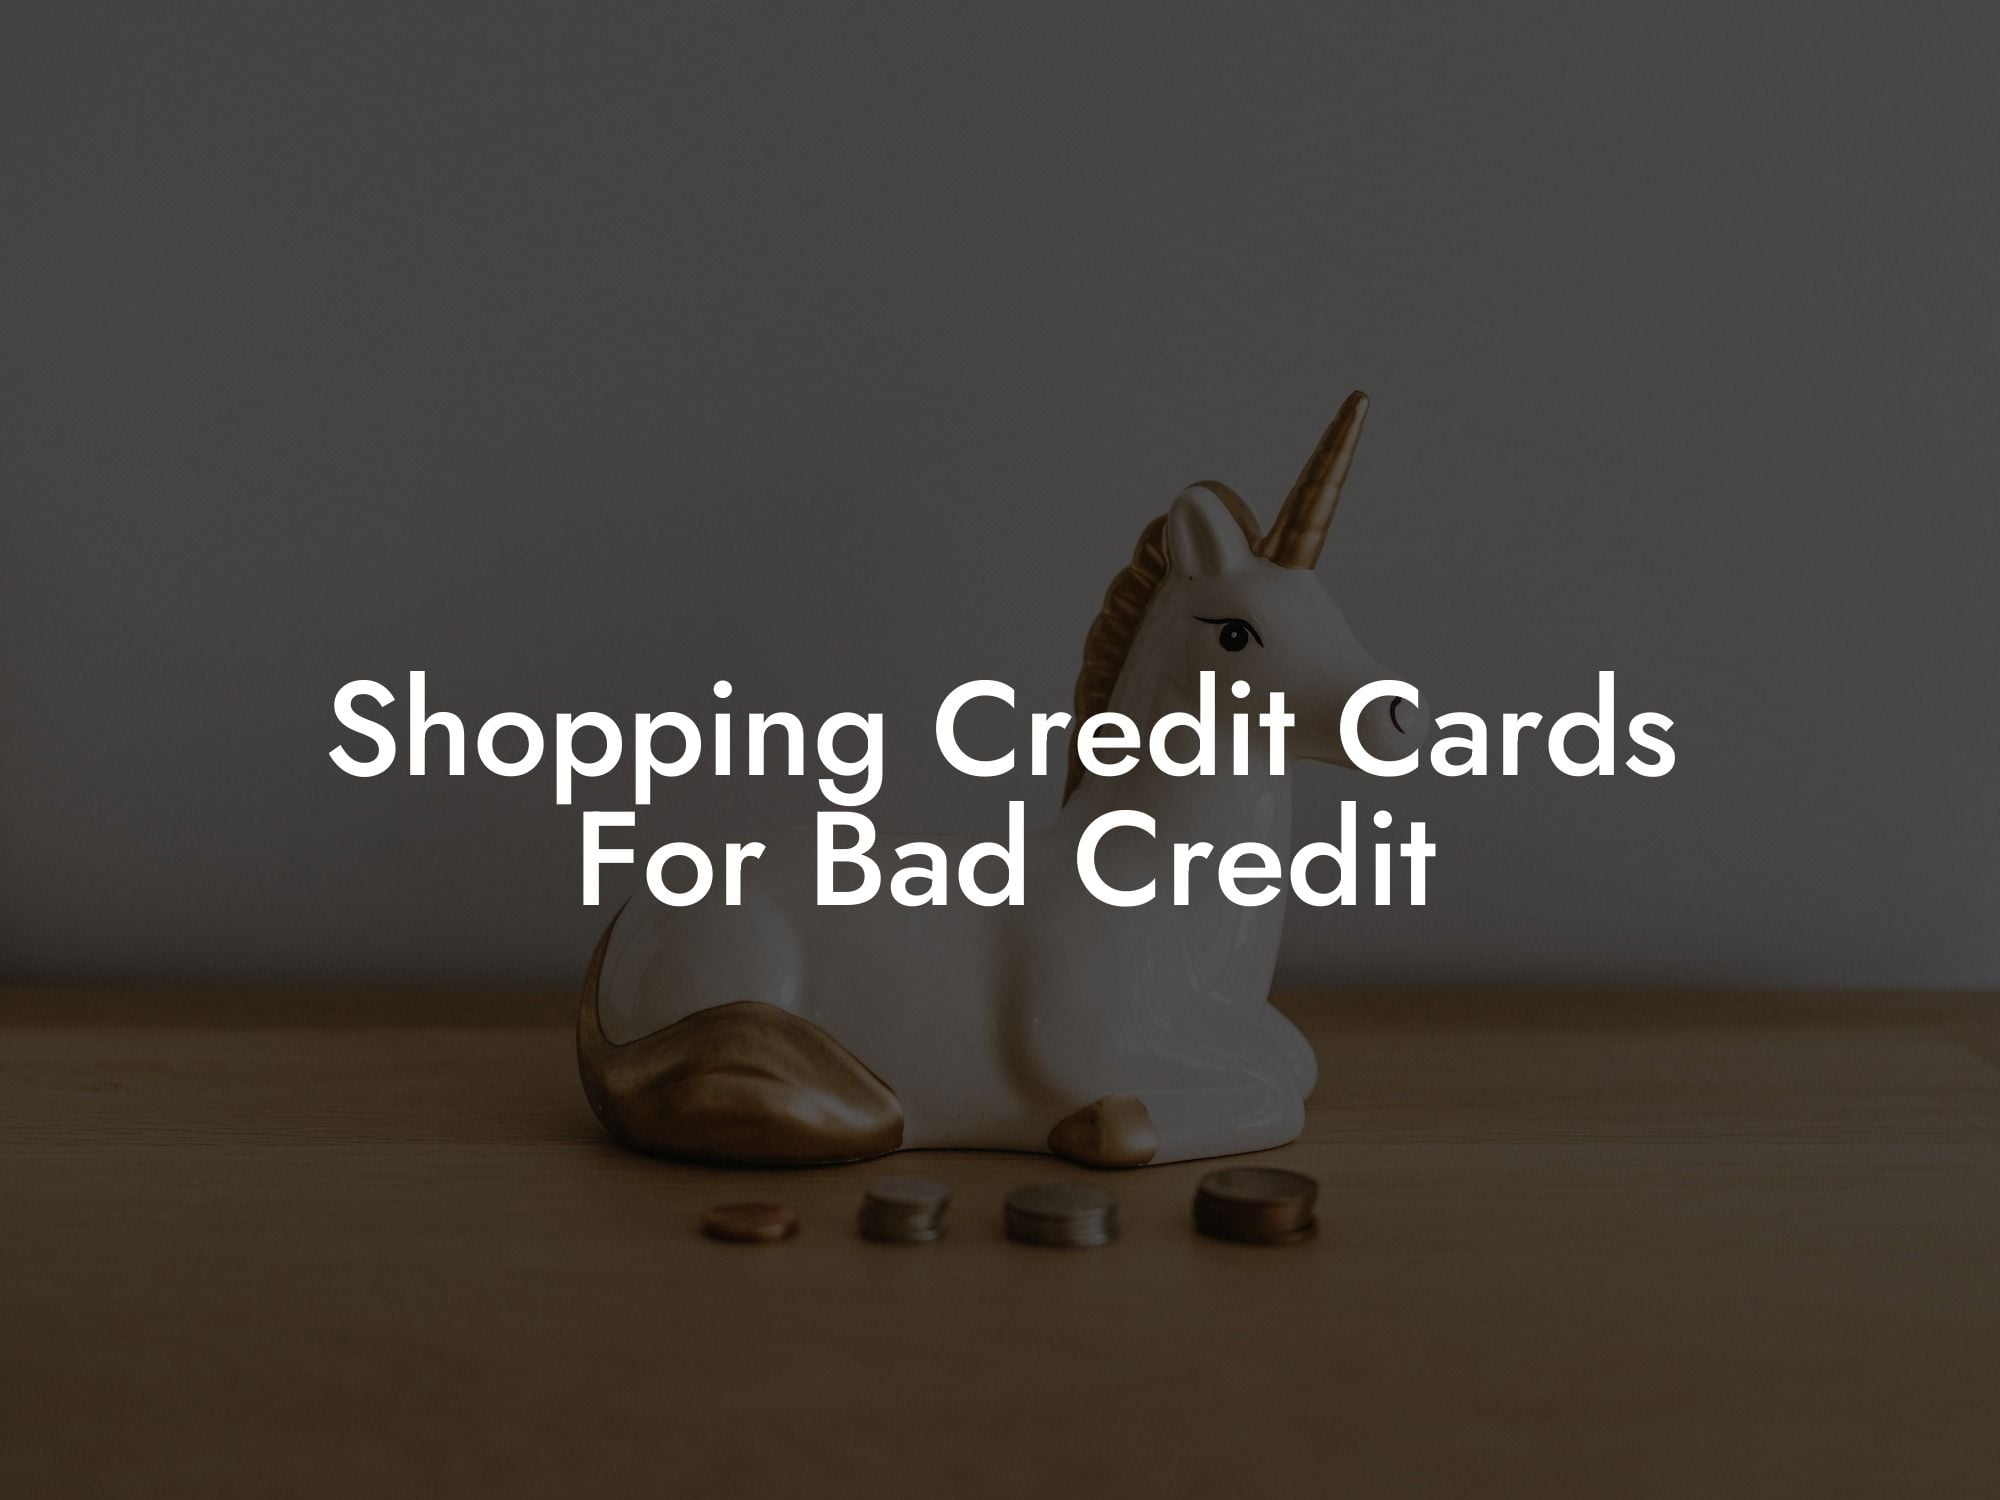 Shopping Credit Cards For Bad Credit